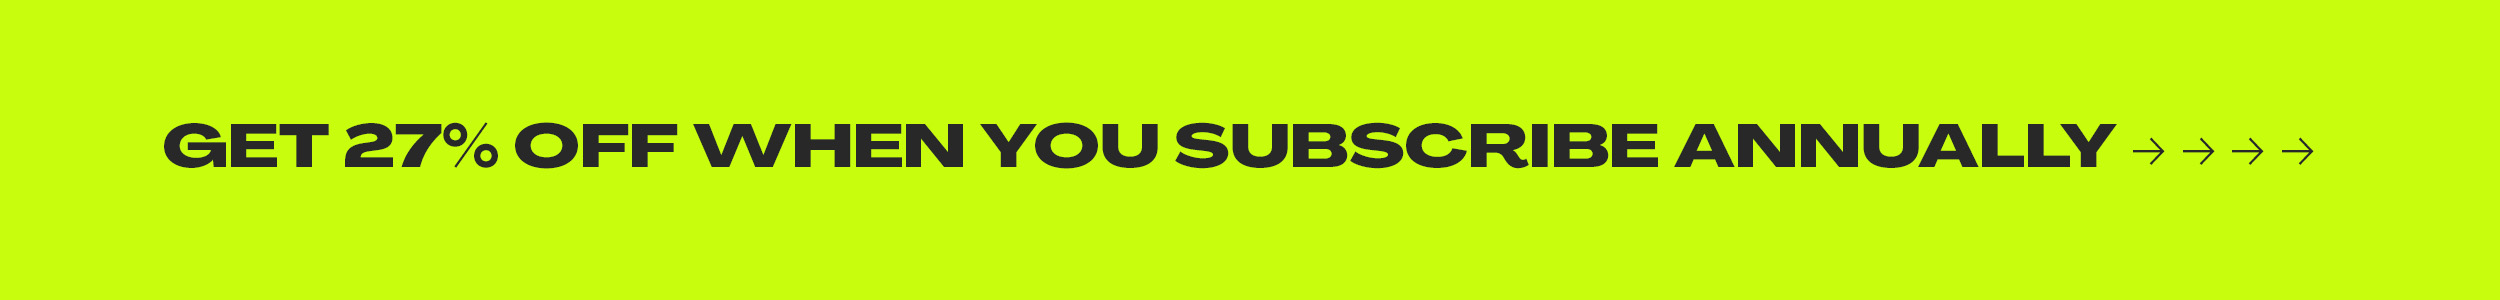 27% OFF SUBS